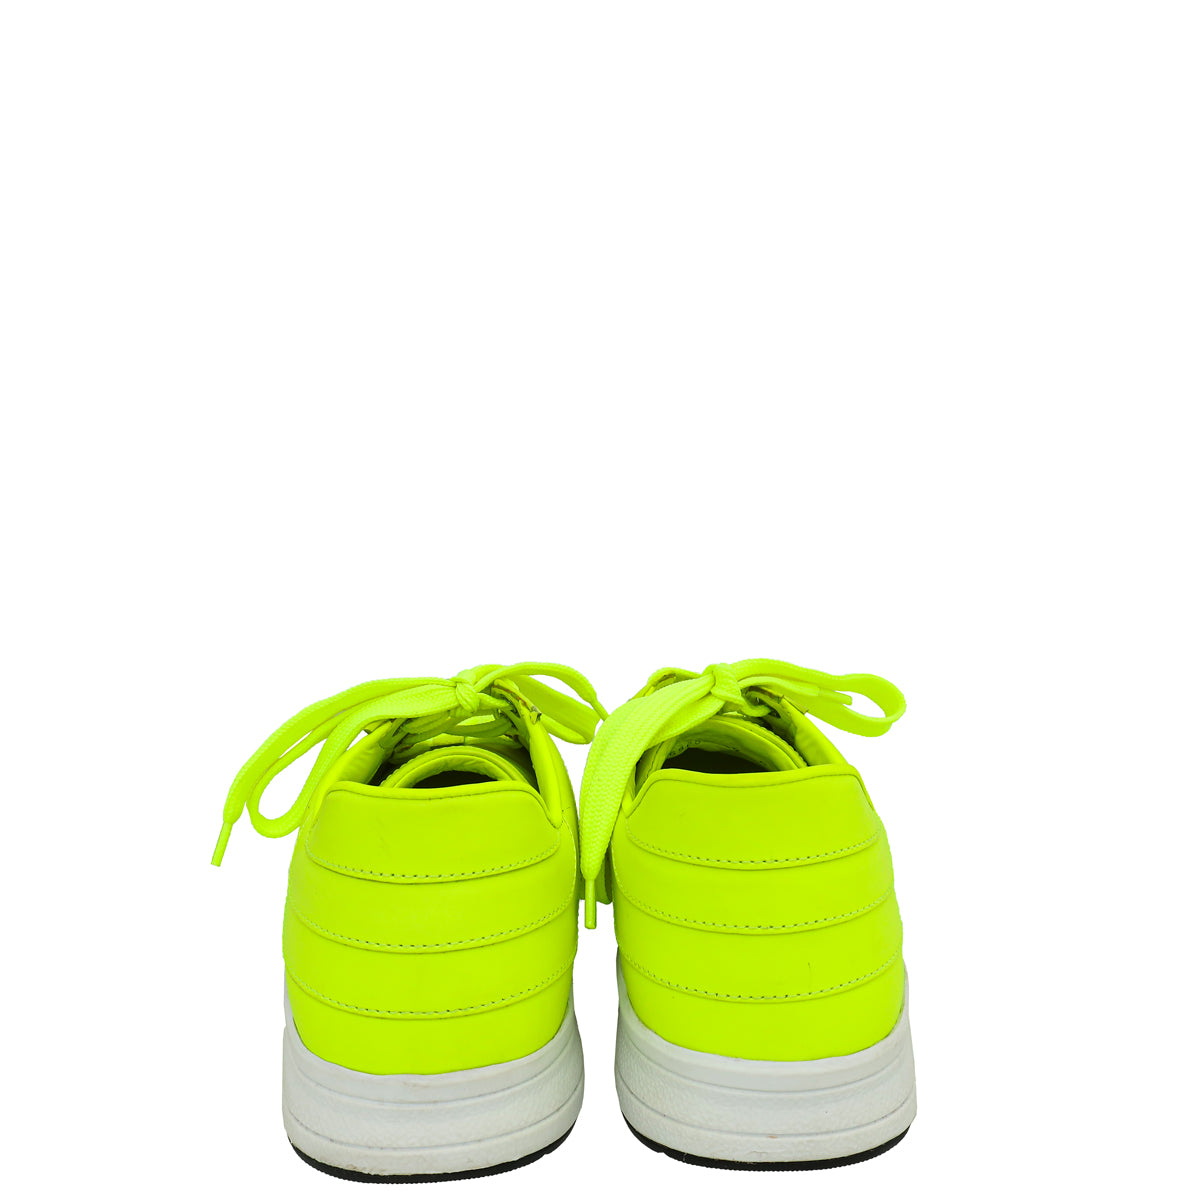 Gucci Neon Green Perforated High Top Sneaker 39